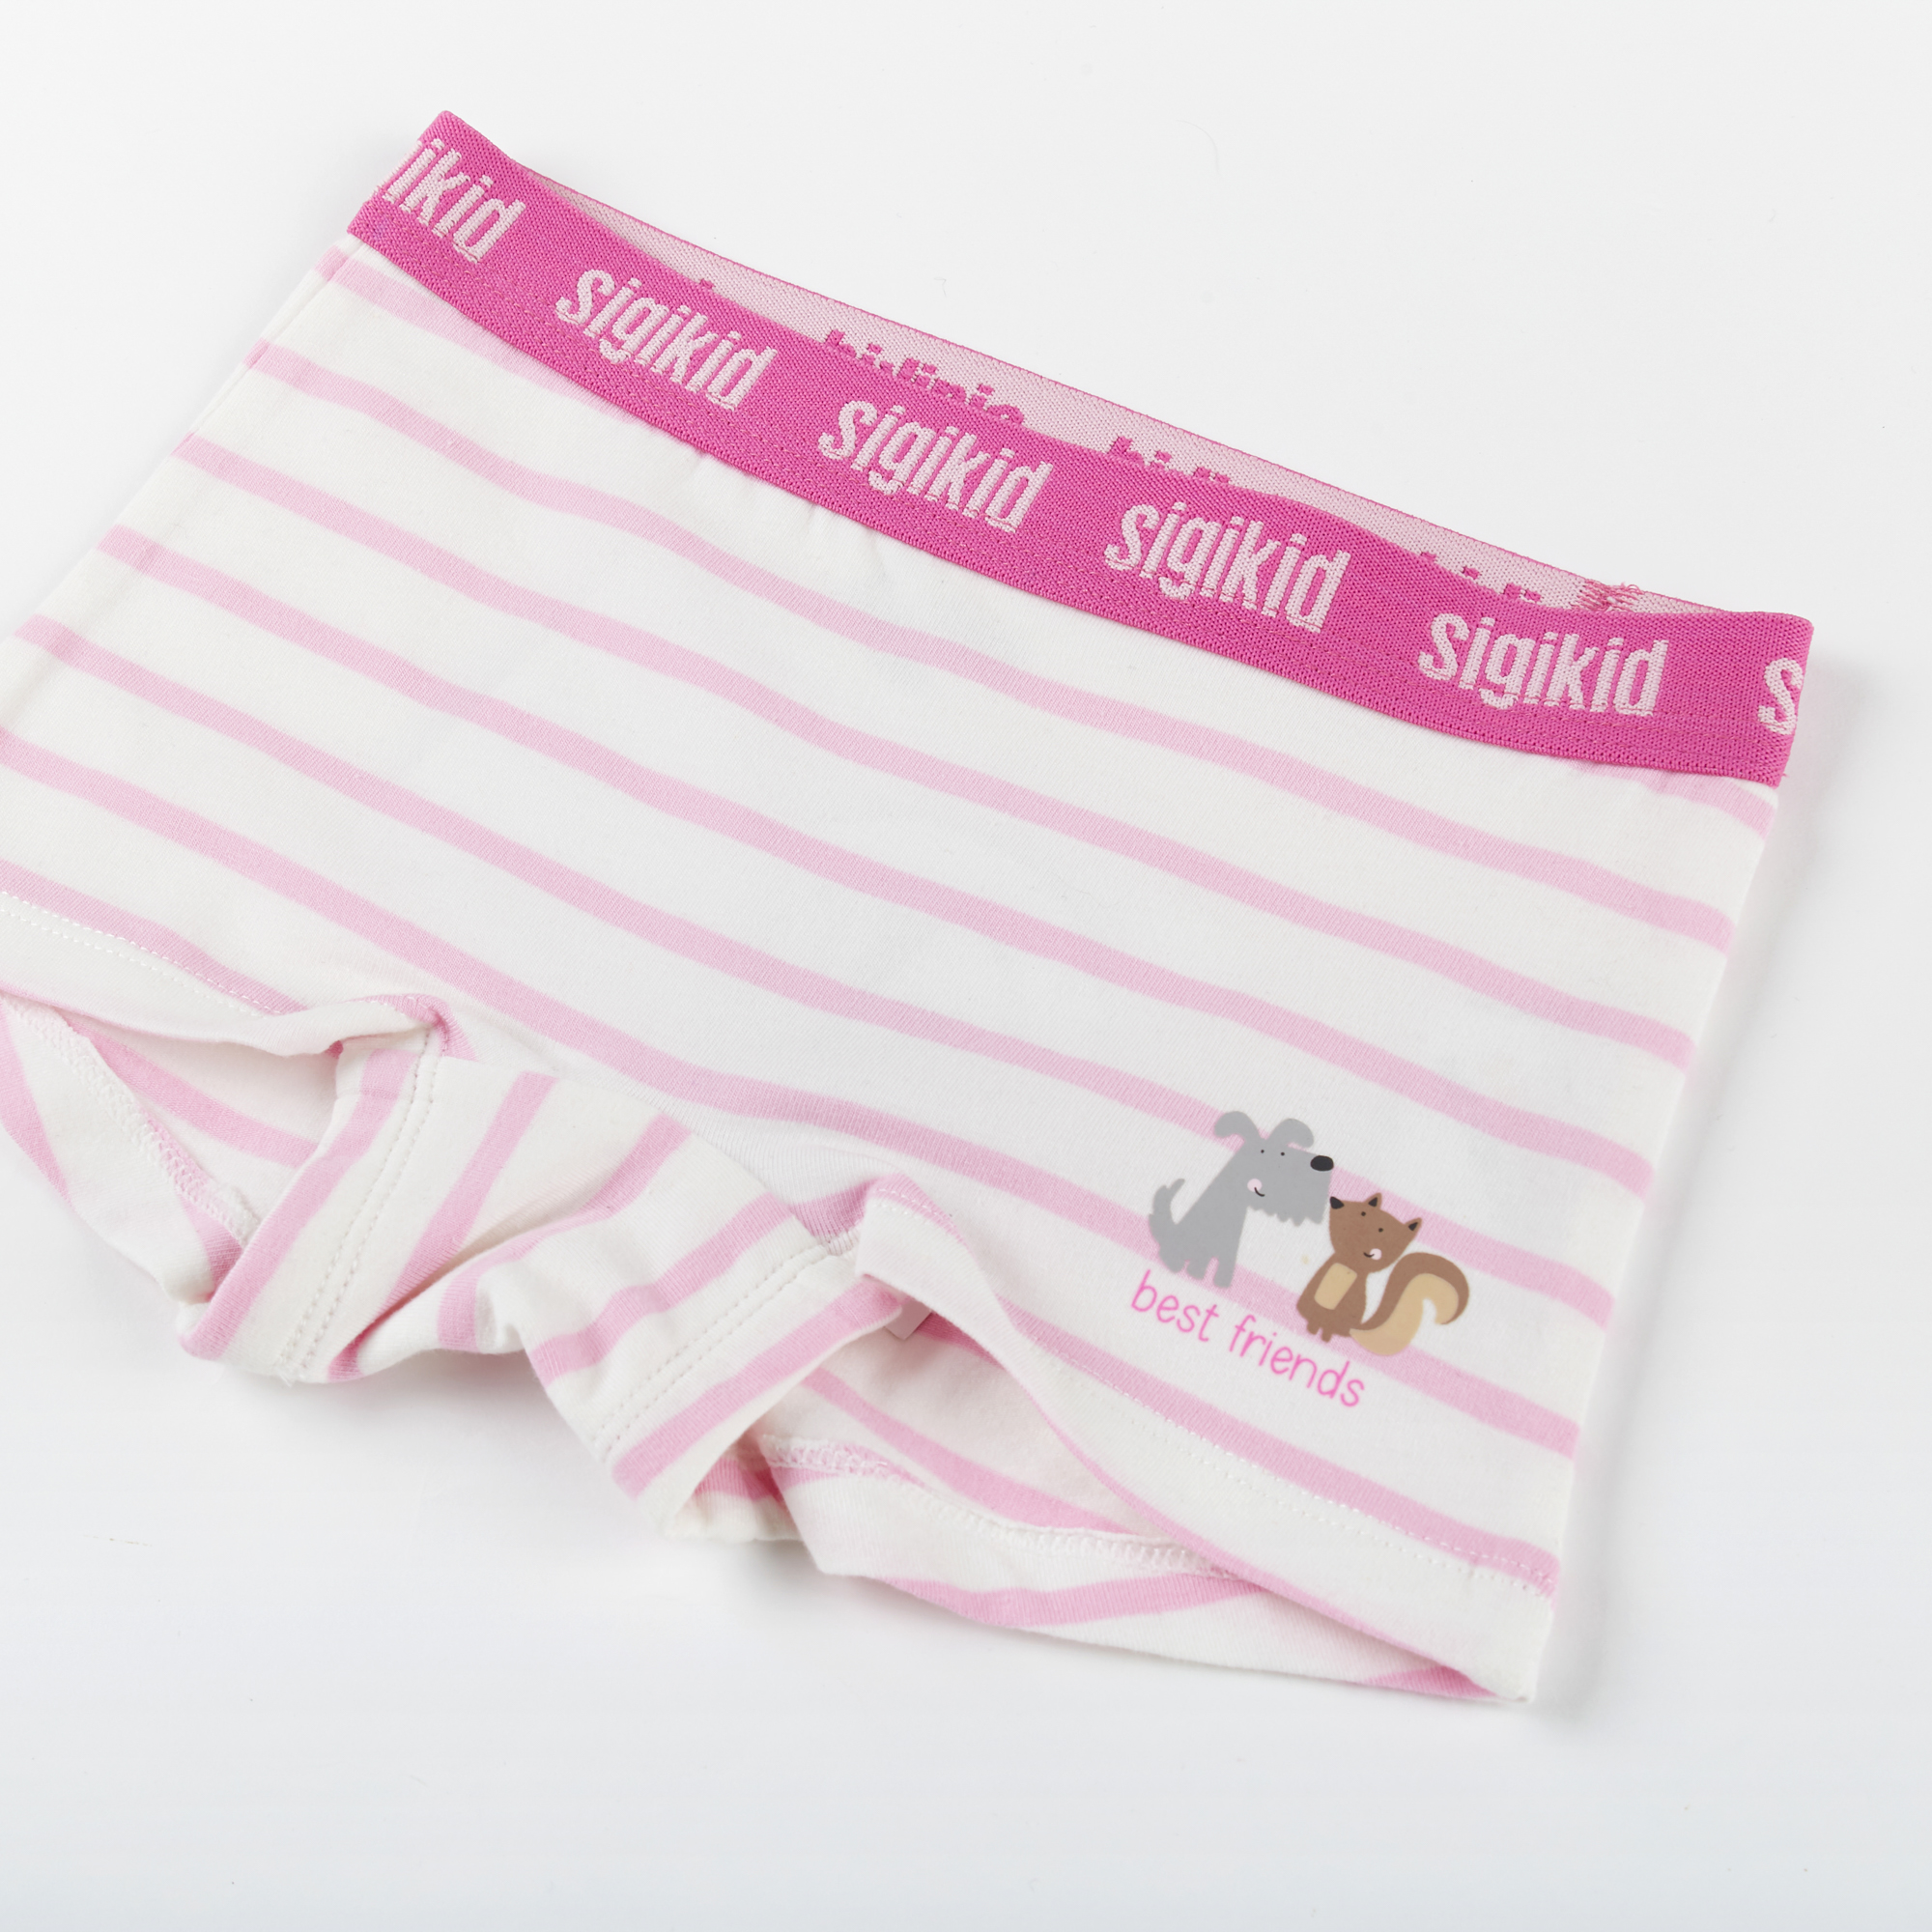 Girl's cami top & panty, pink/white striped